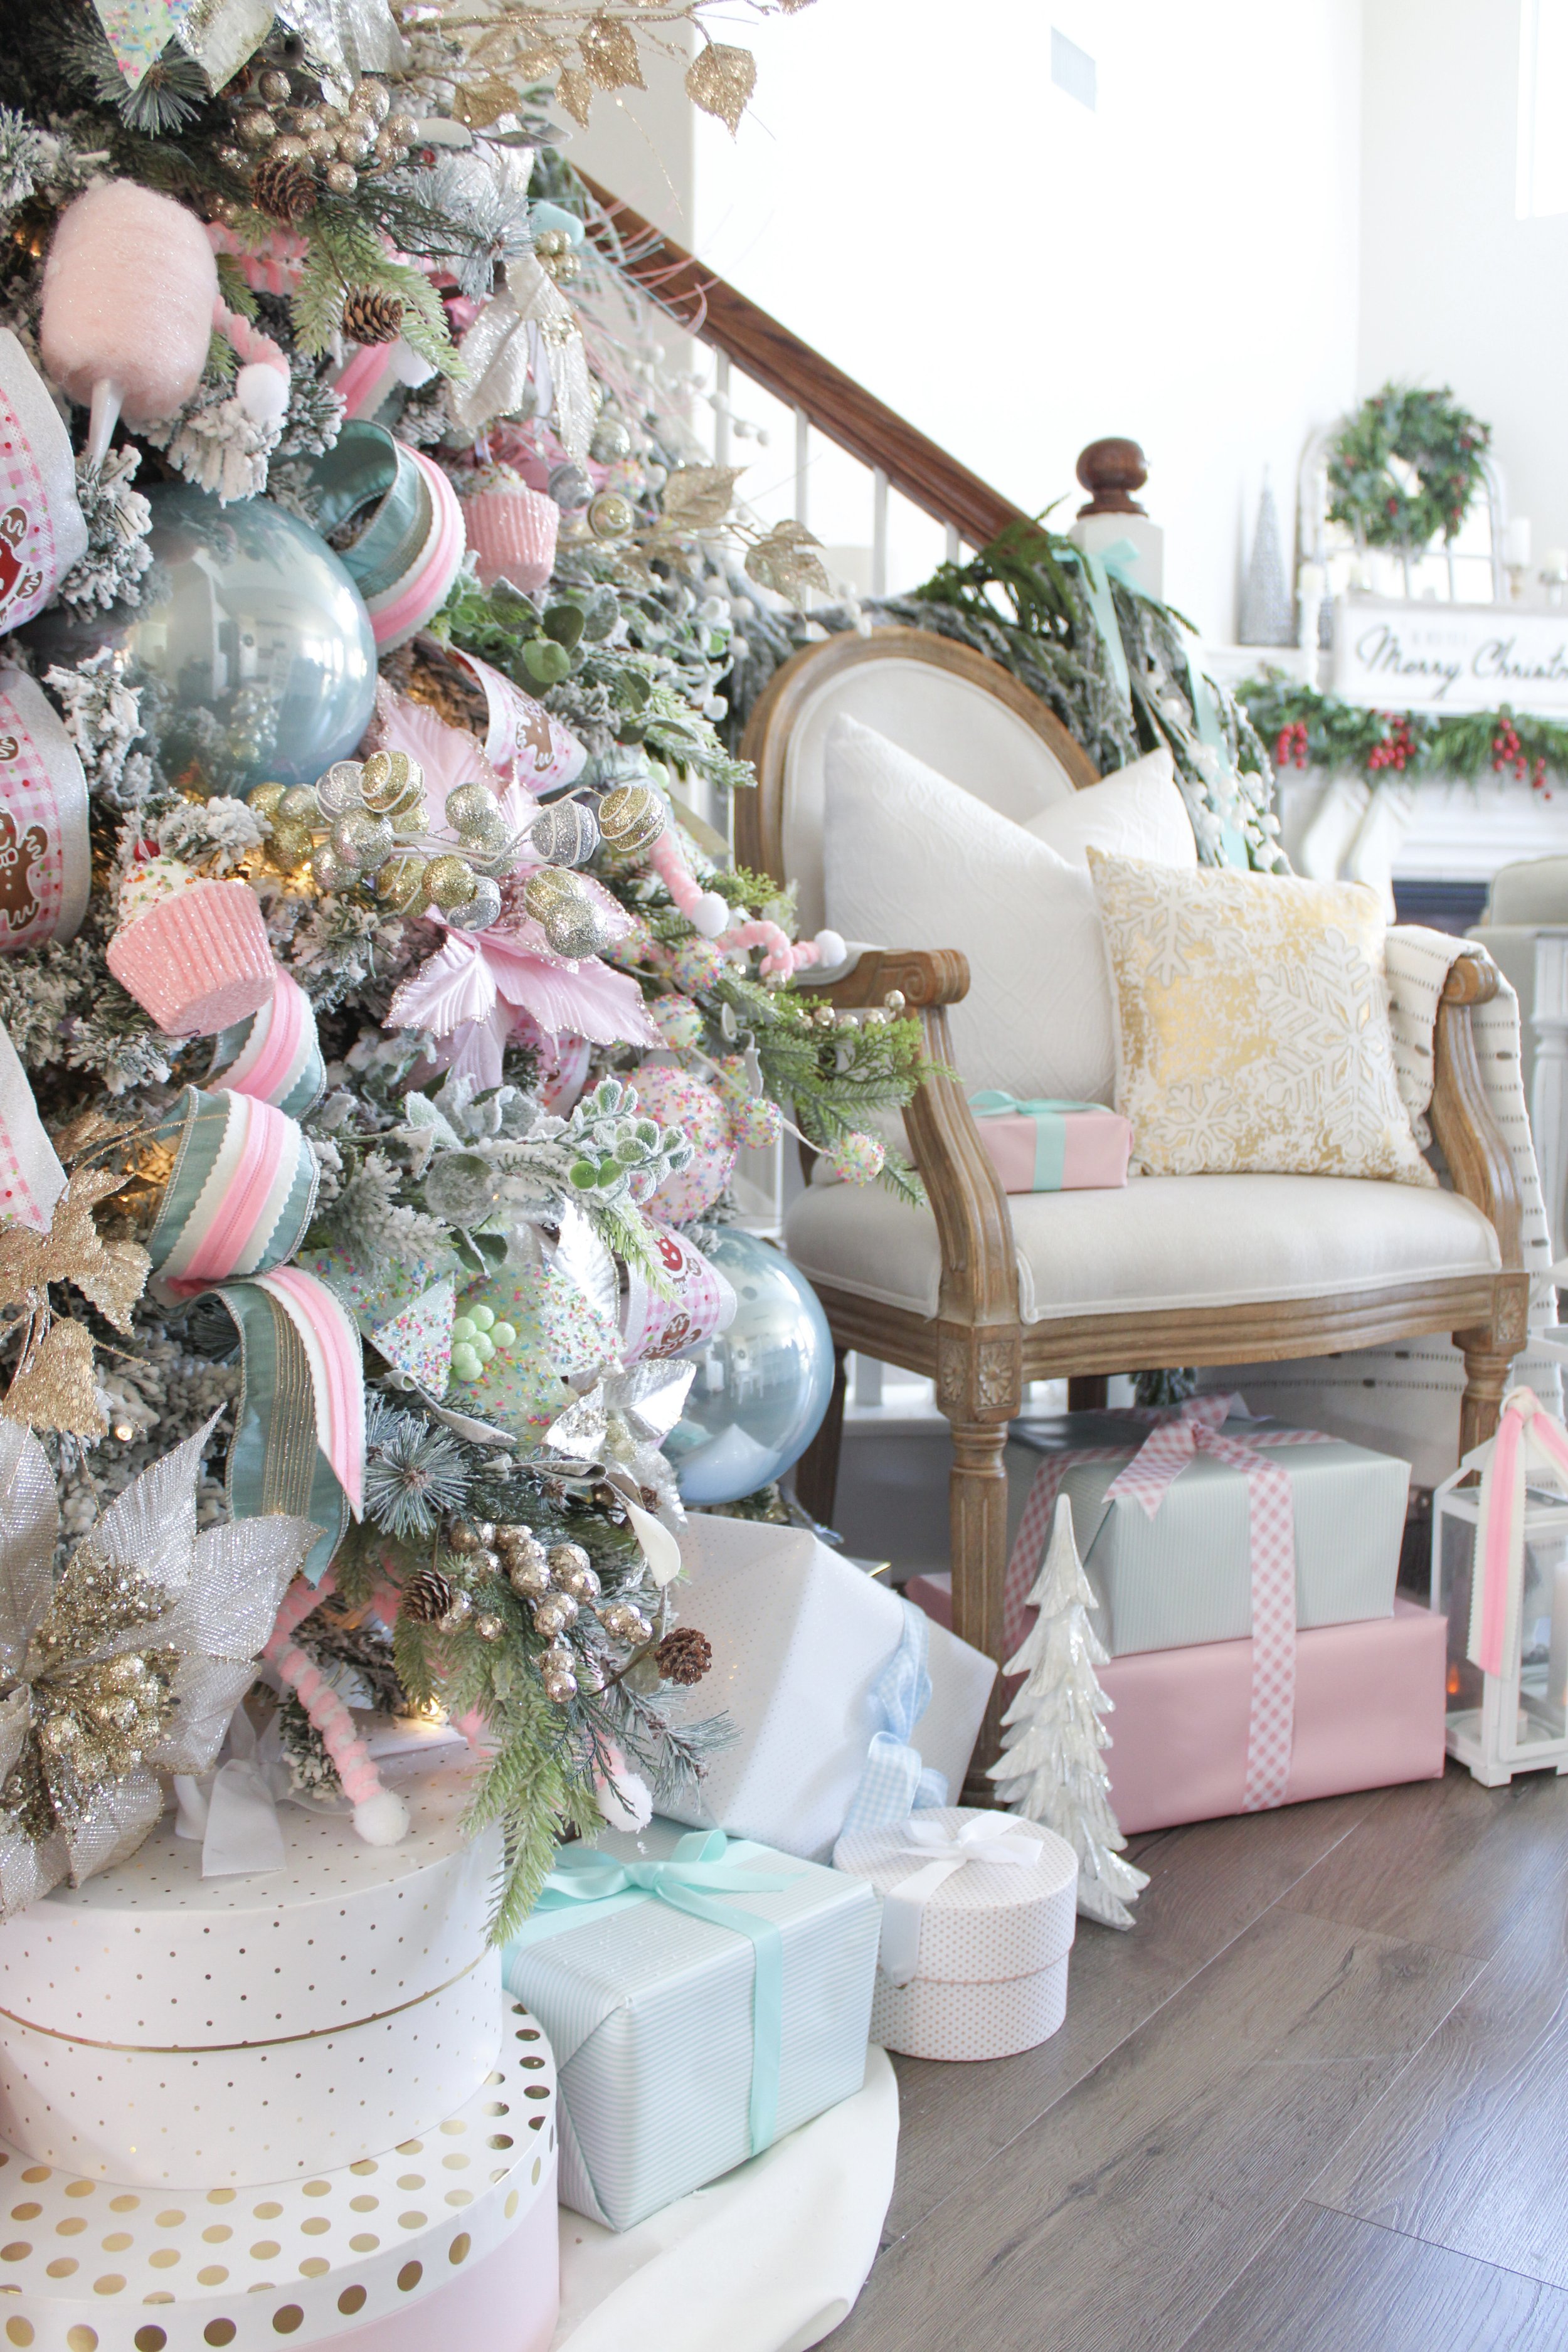 I'm Dreaming of a White.. and Pink and Gold Christmas!